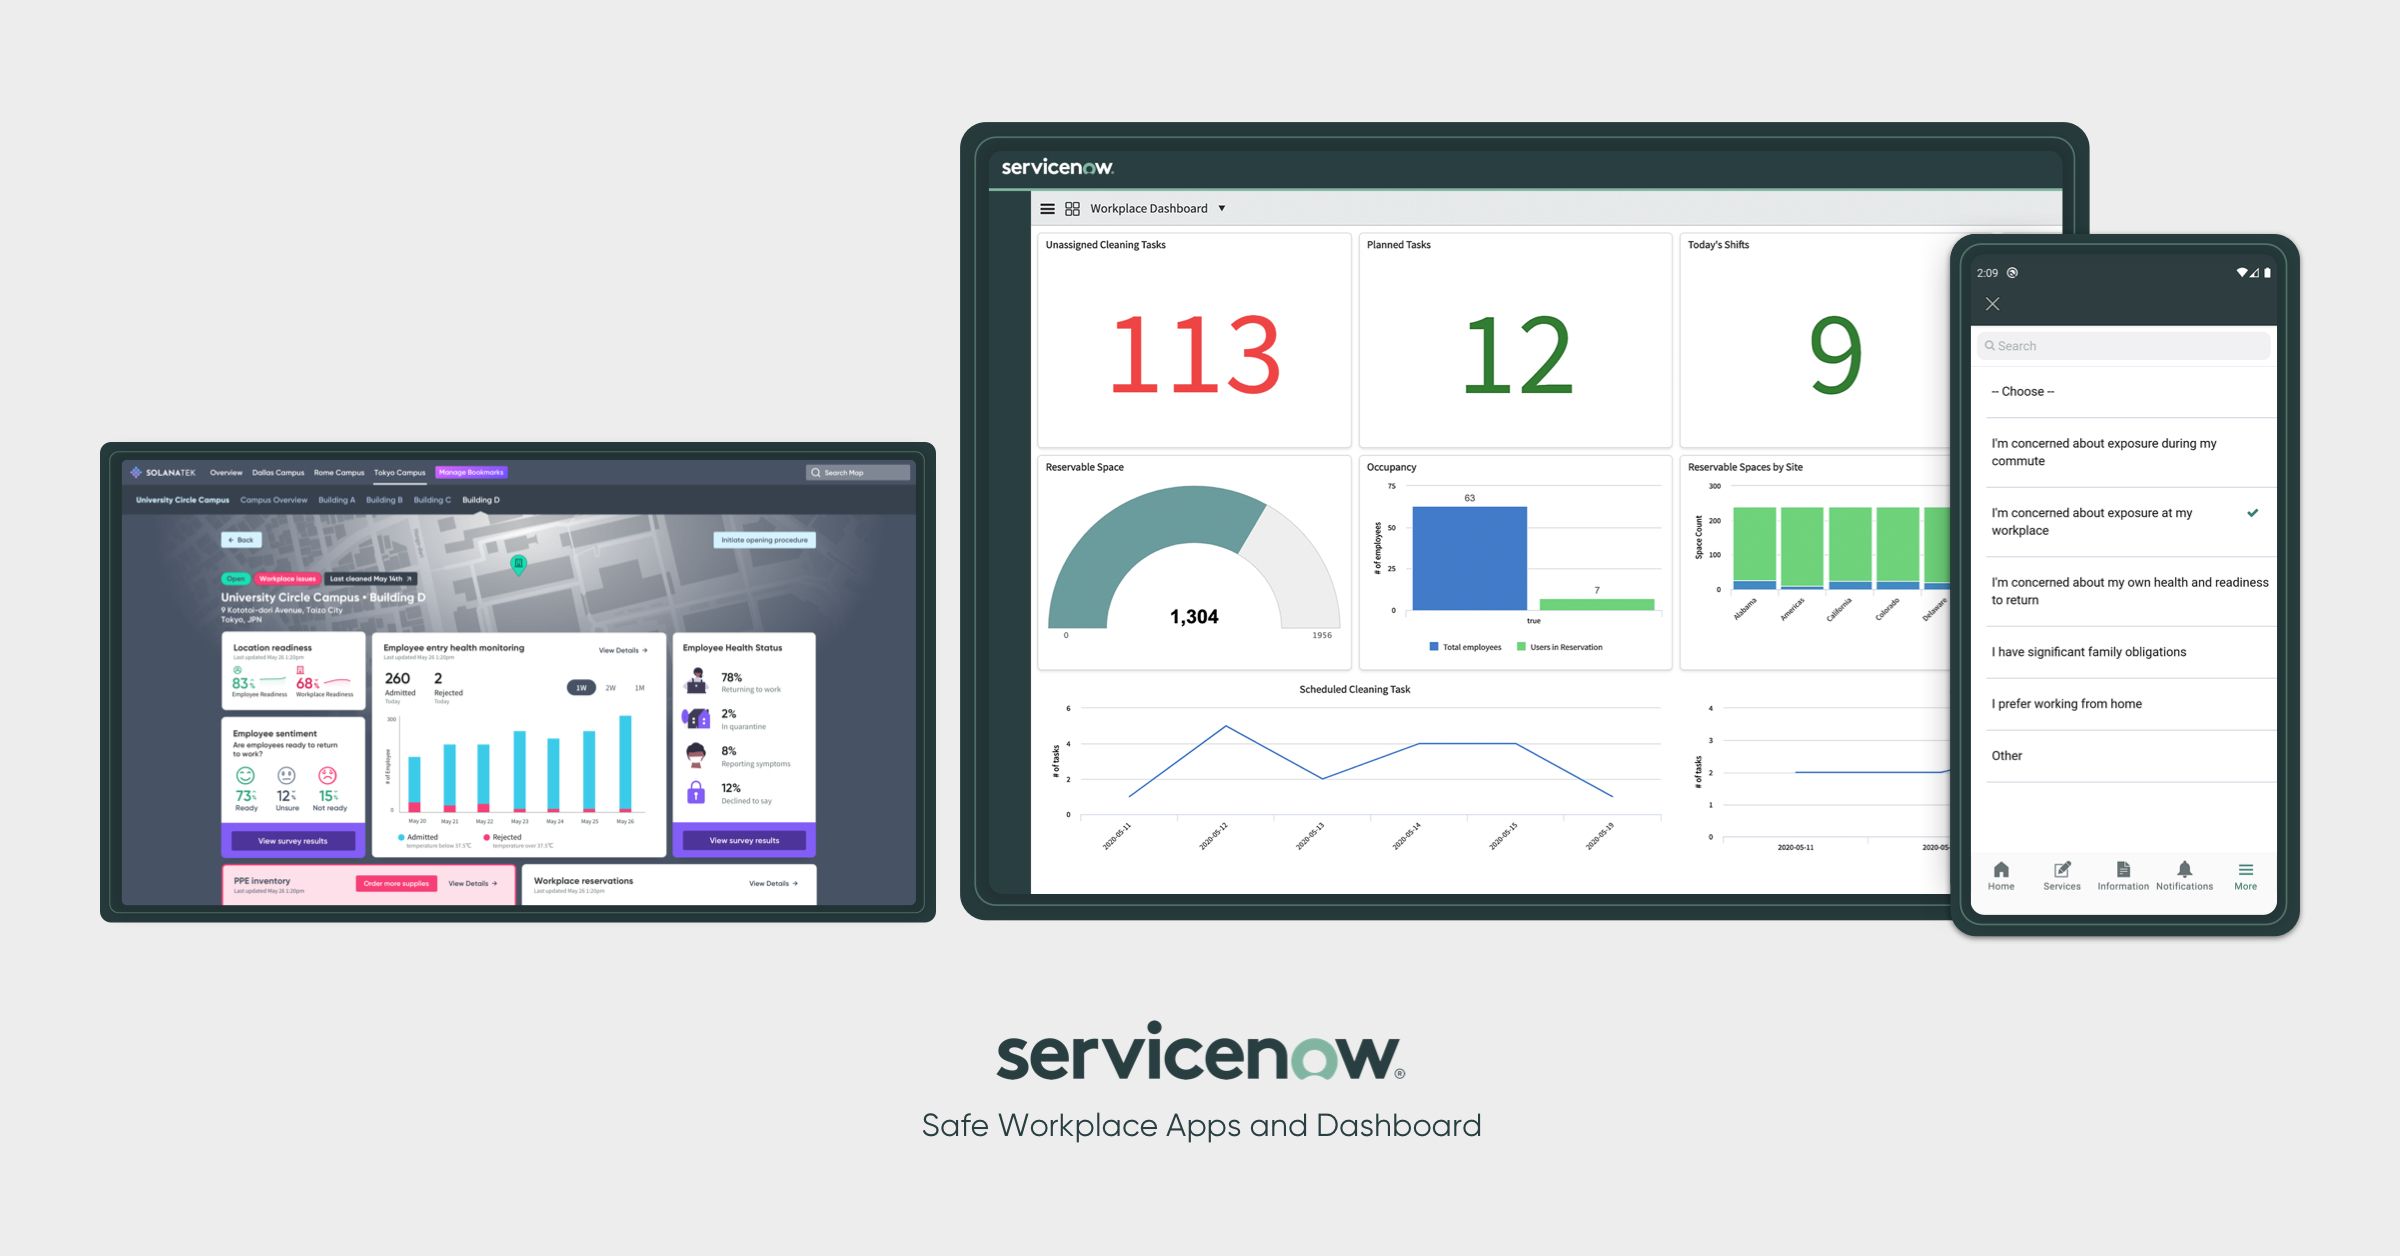 ServiceNow-Safe Workplace Apps